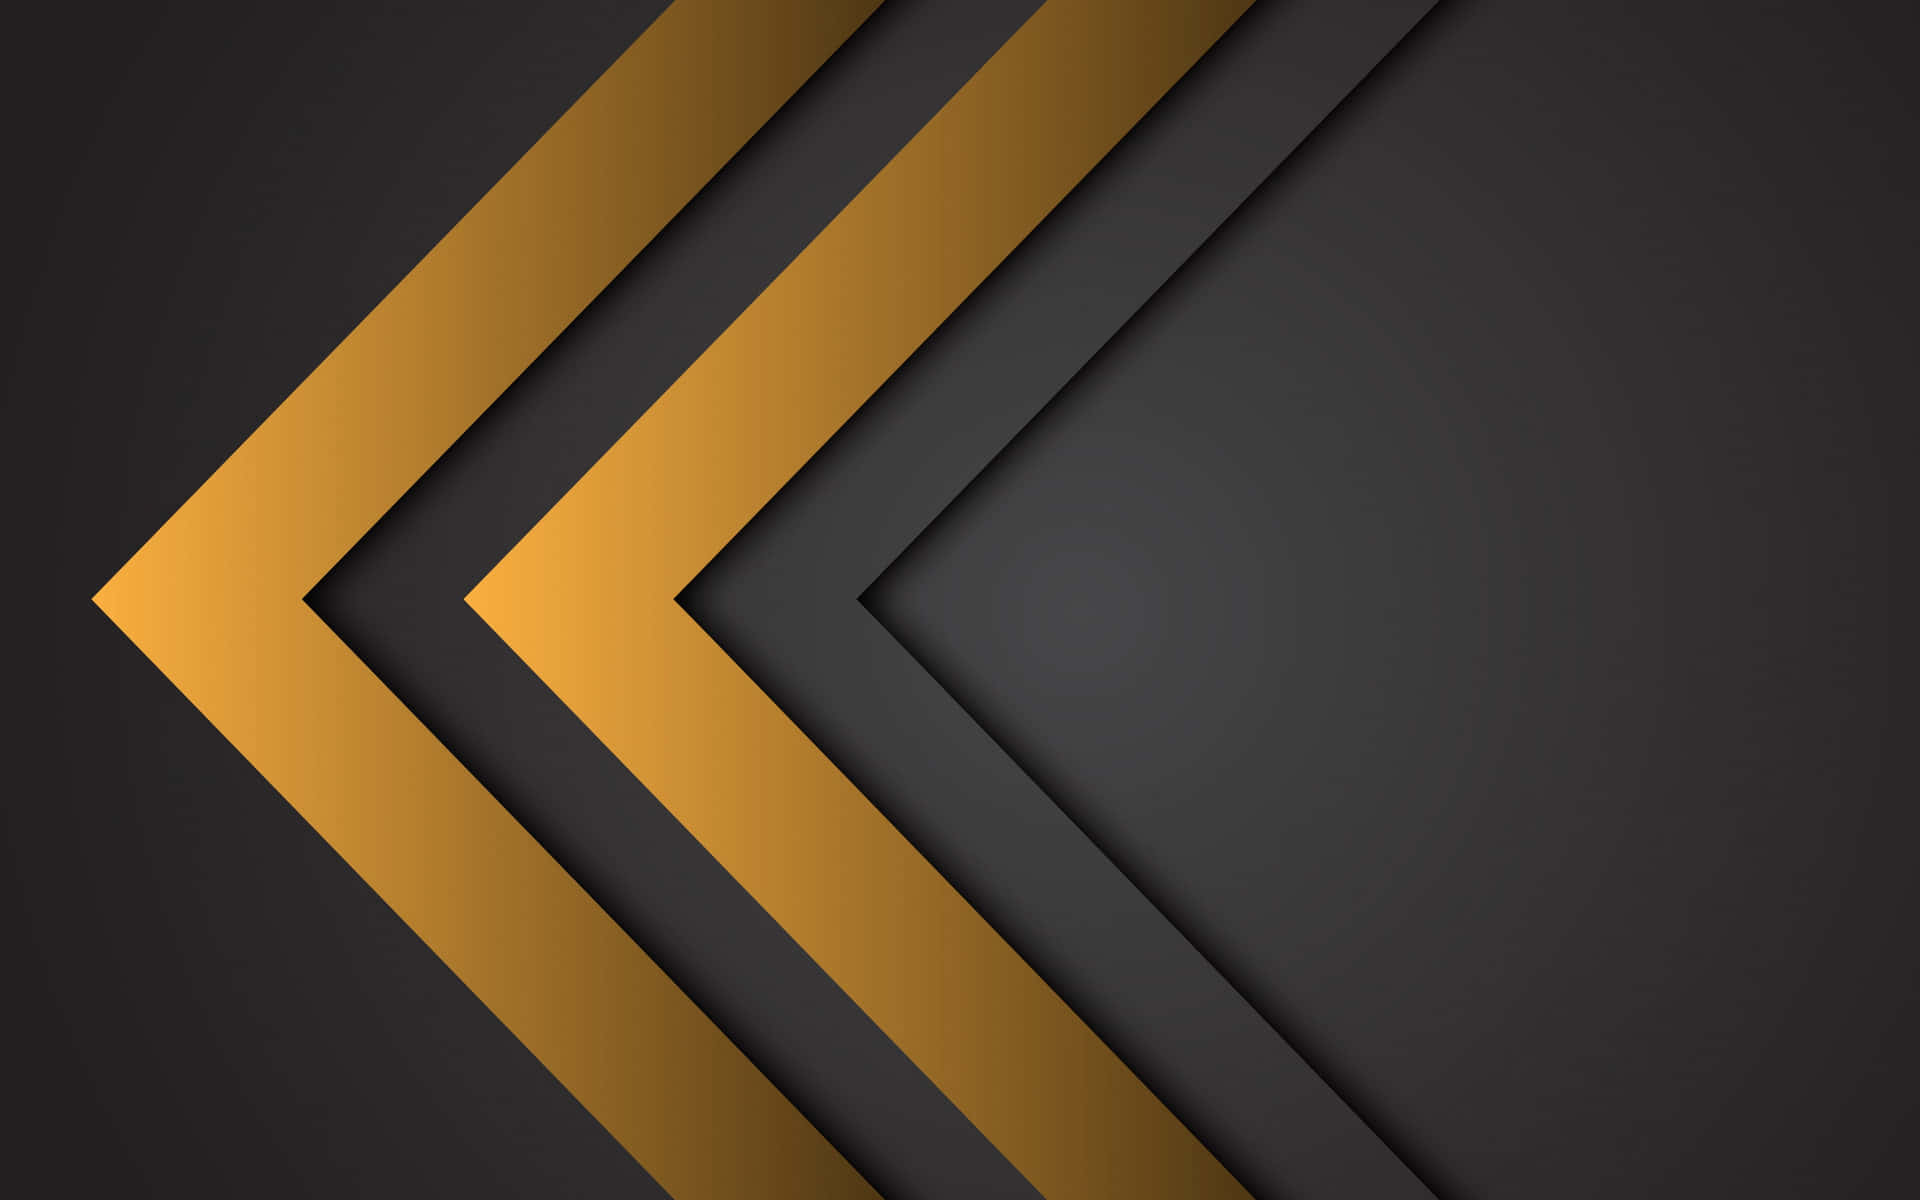 Gold And Black Arrows On A Black Background